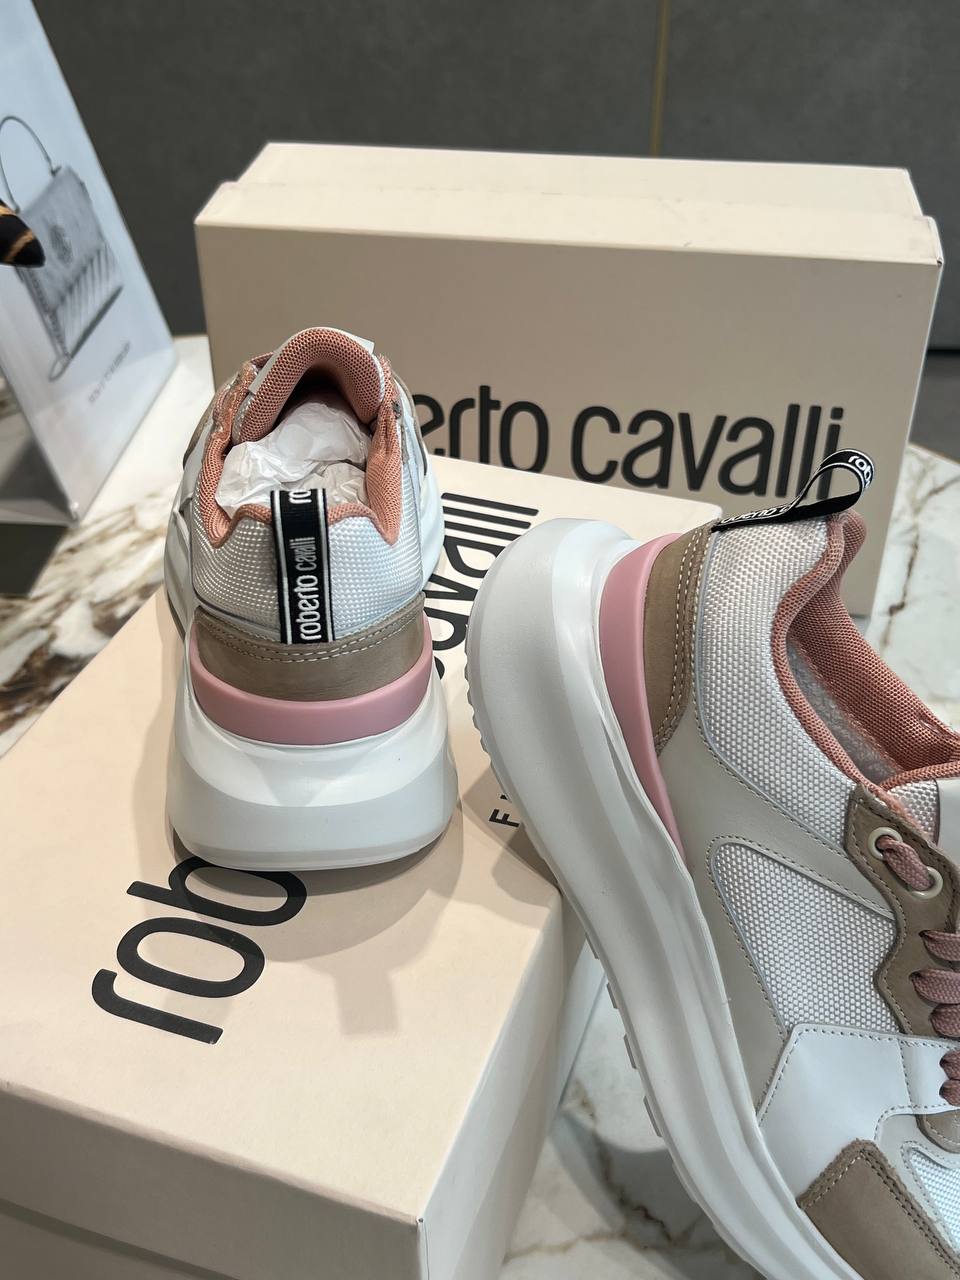 Roberto Cavalli Outlets 5916